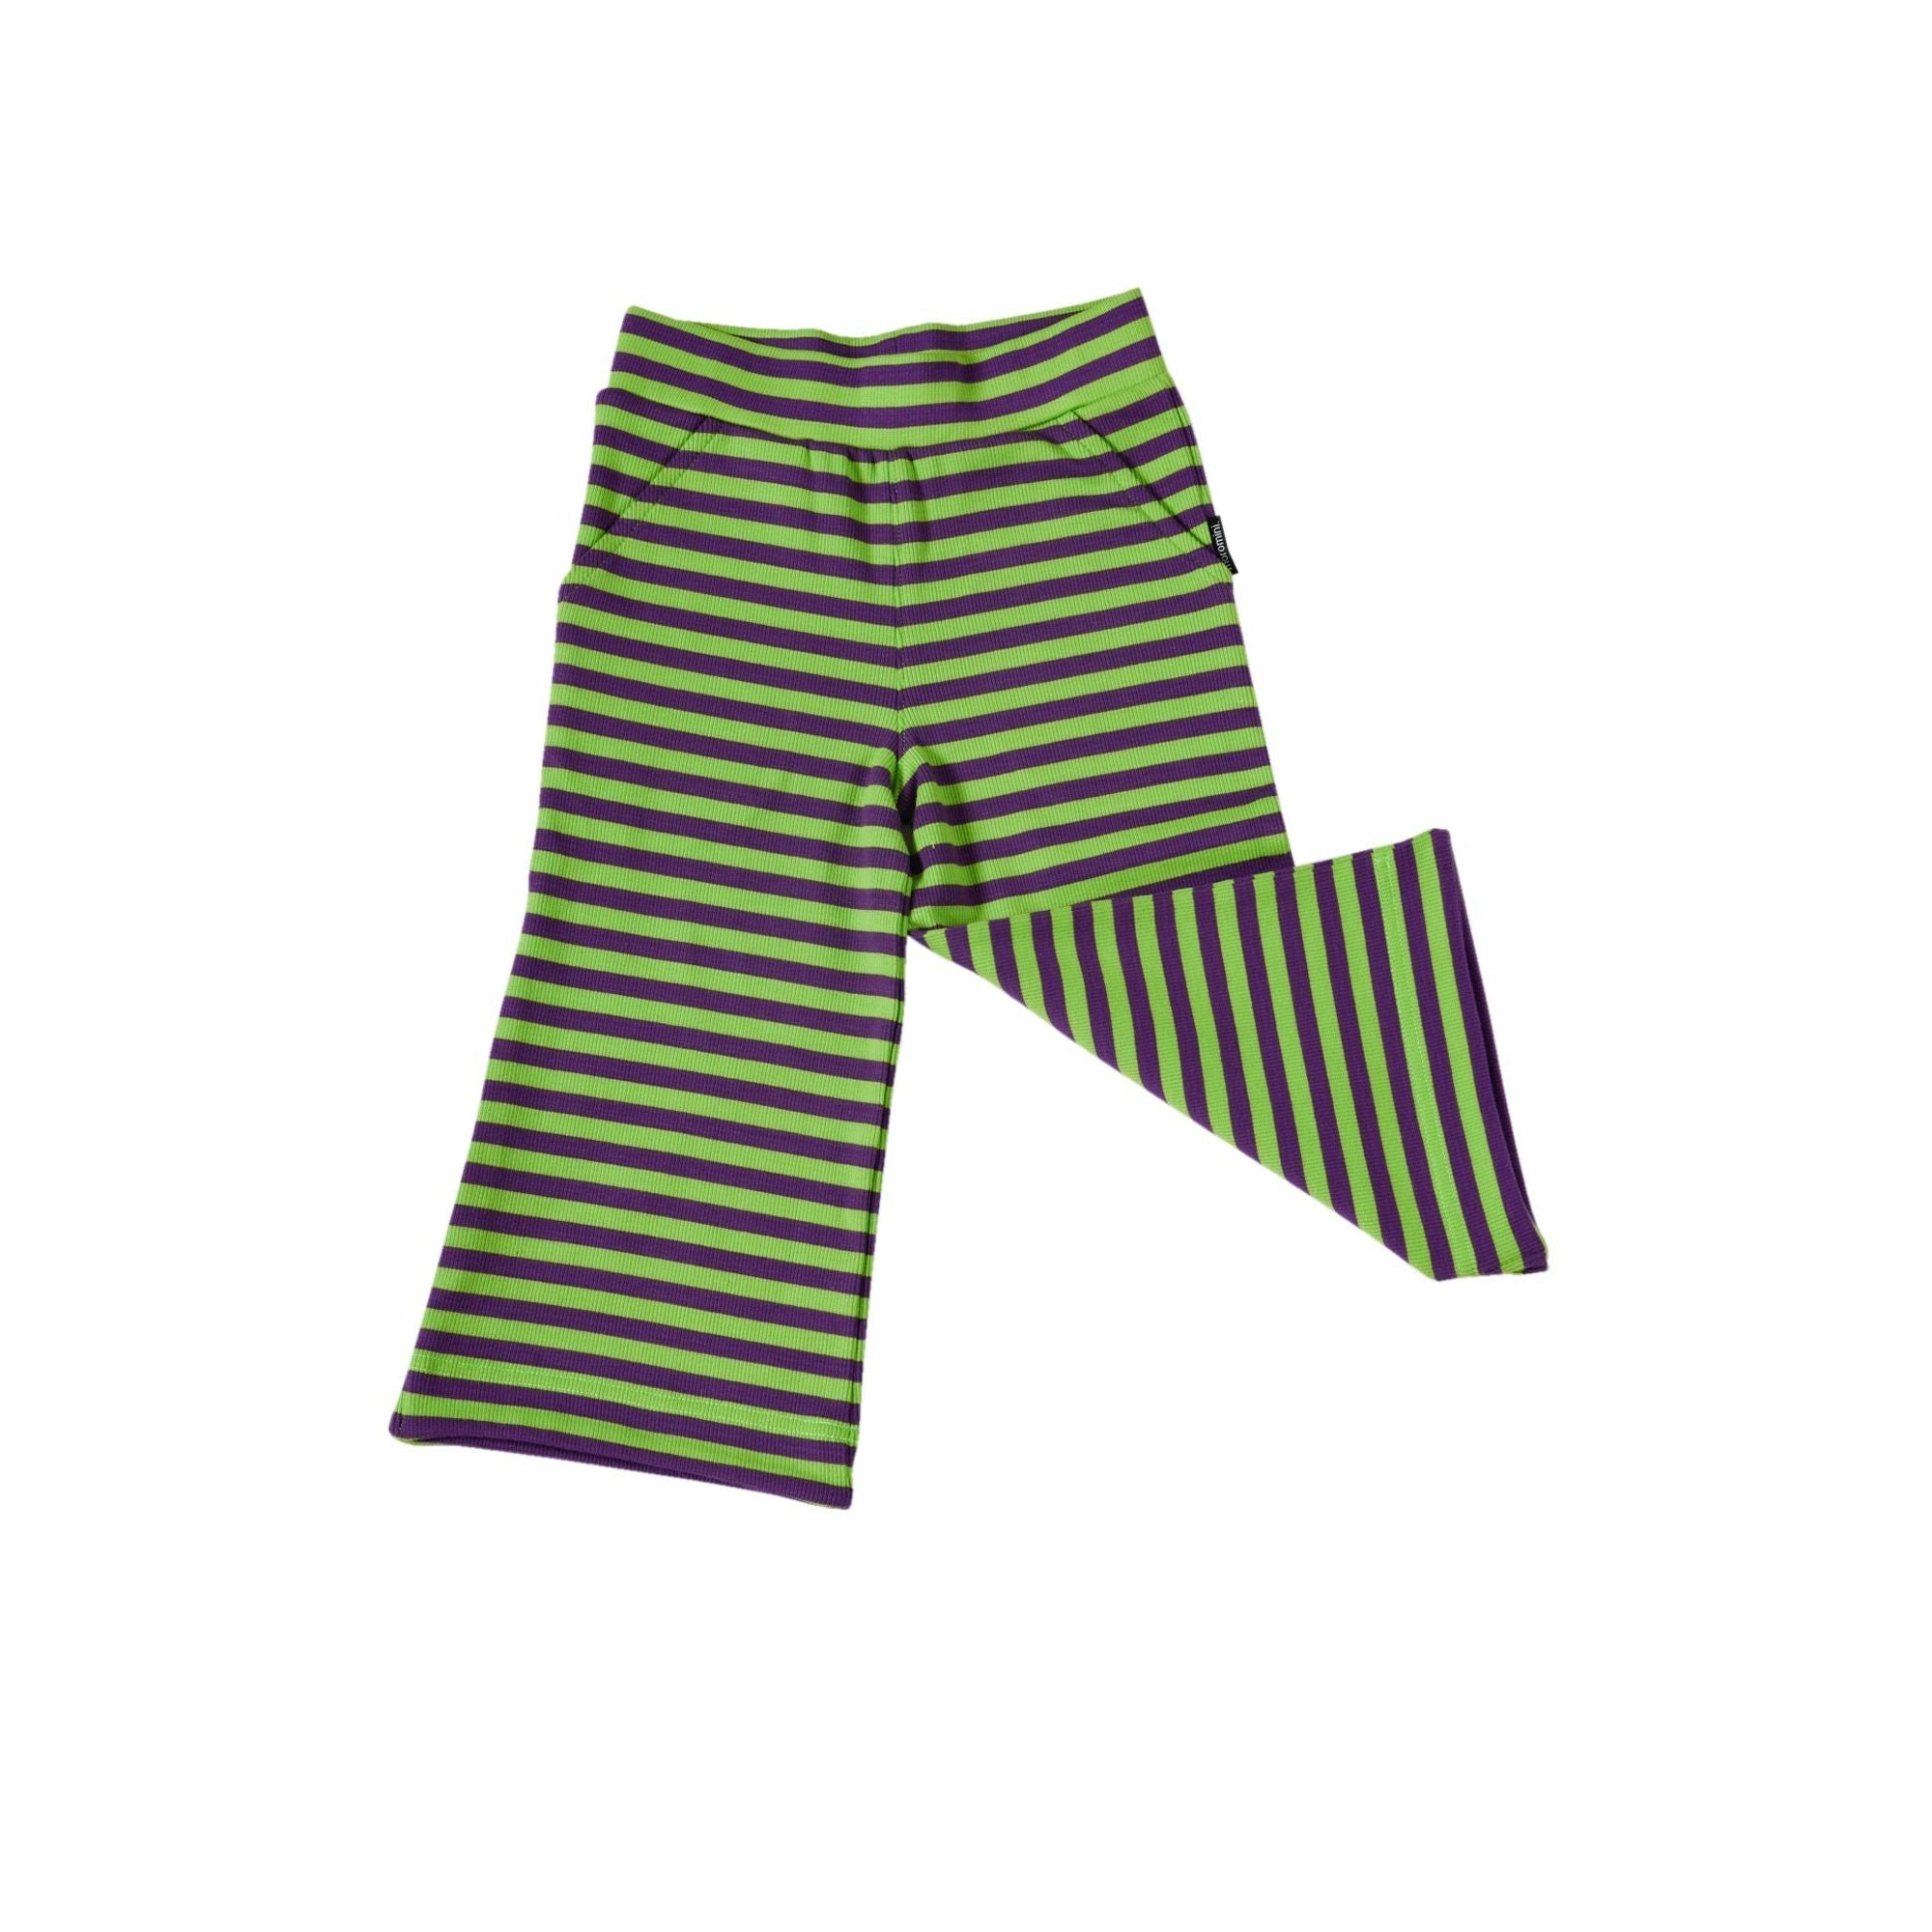 Purple / Green Ribbed Culotte Pants - 2 Left Size 2-3 & 9-11 years-Moromini-Modern Rascals